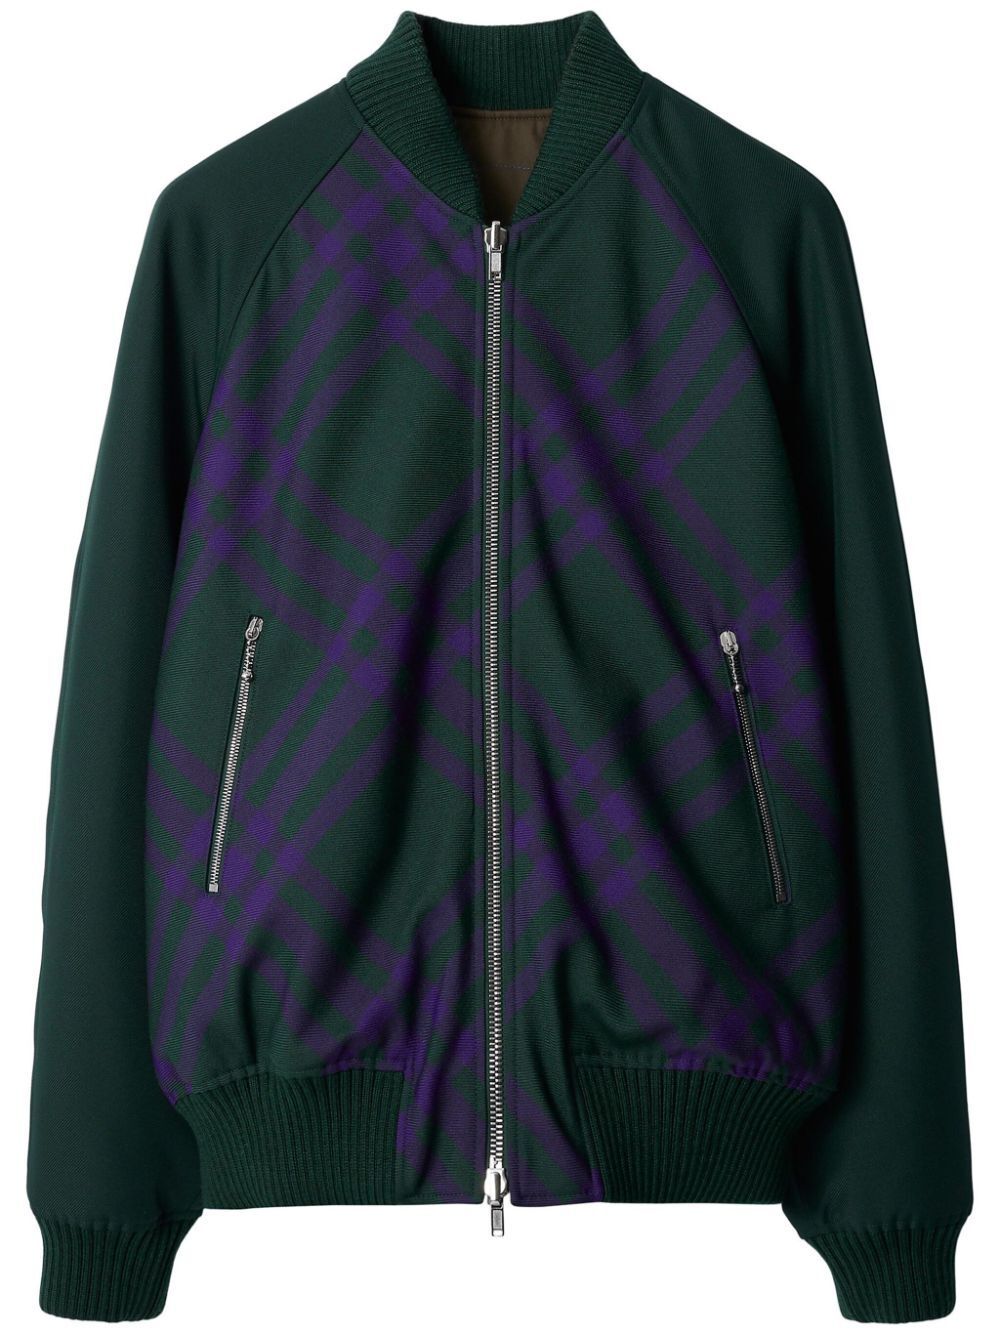 BURBERRY Luxurious Reversible Bomber Jacket for the New Season